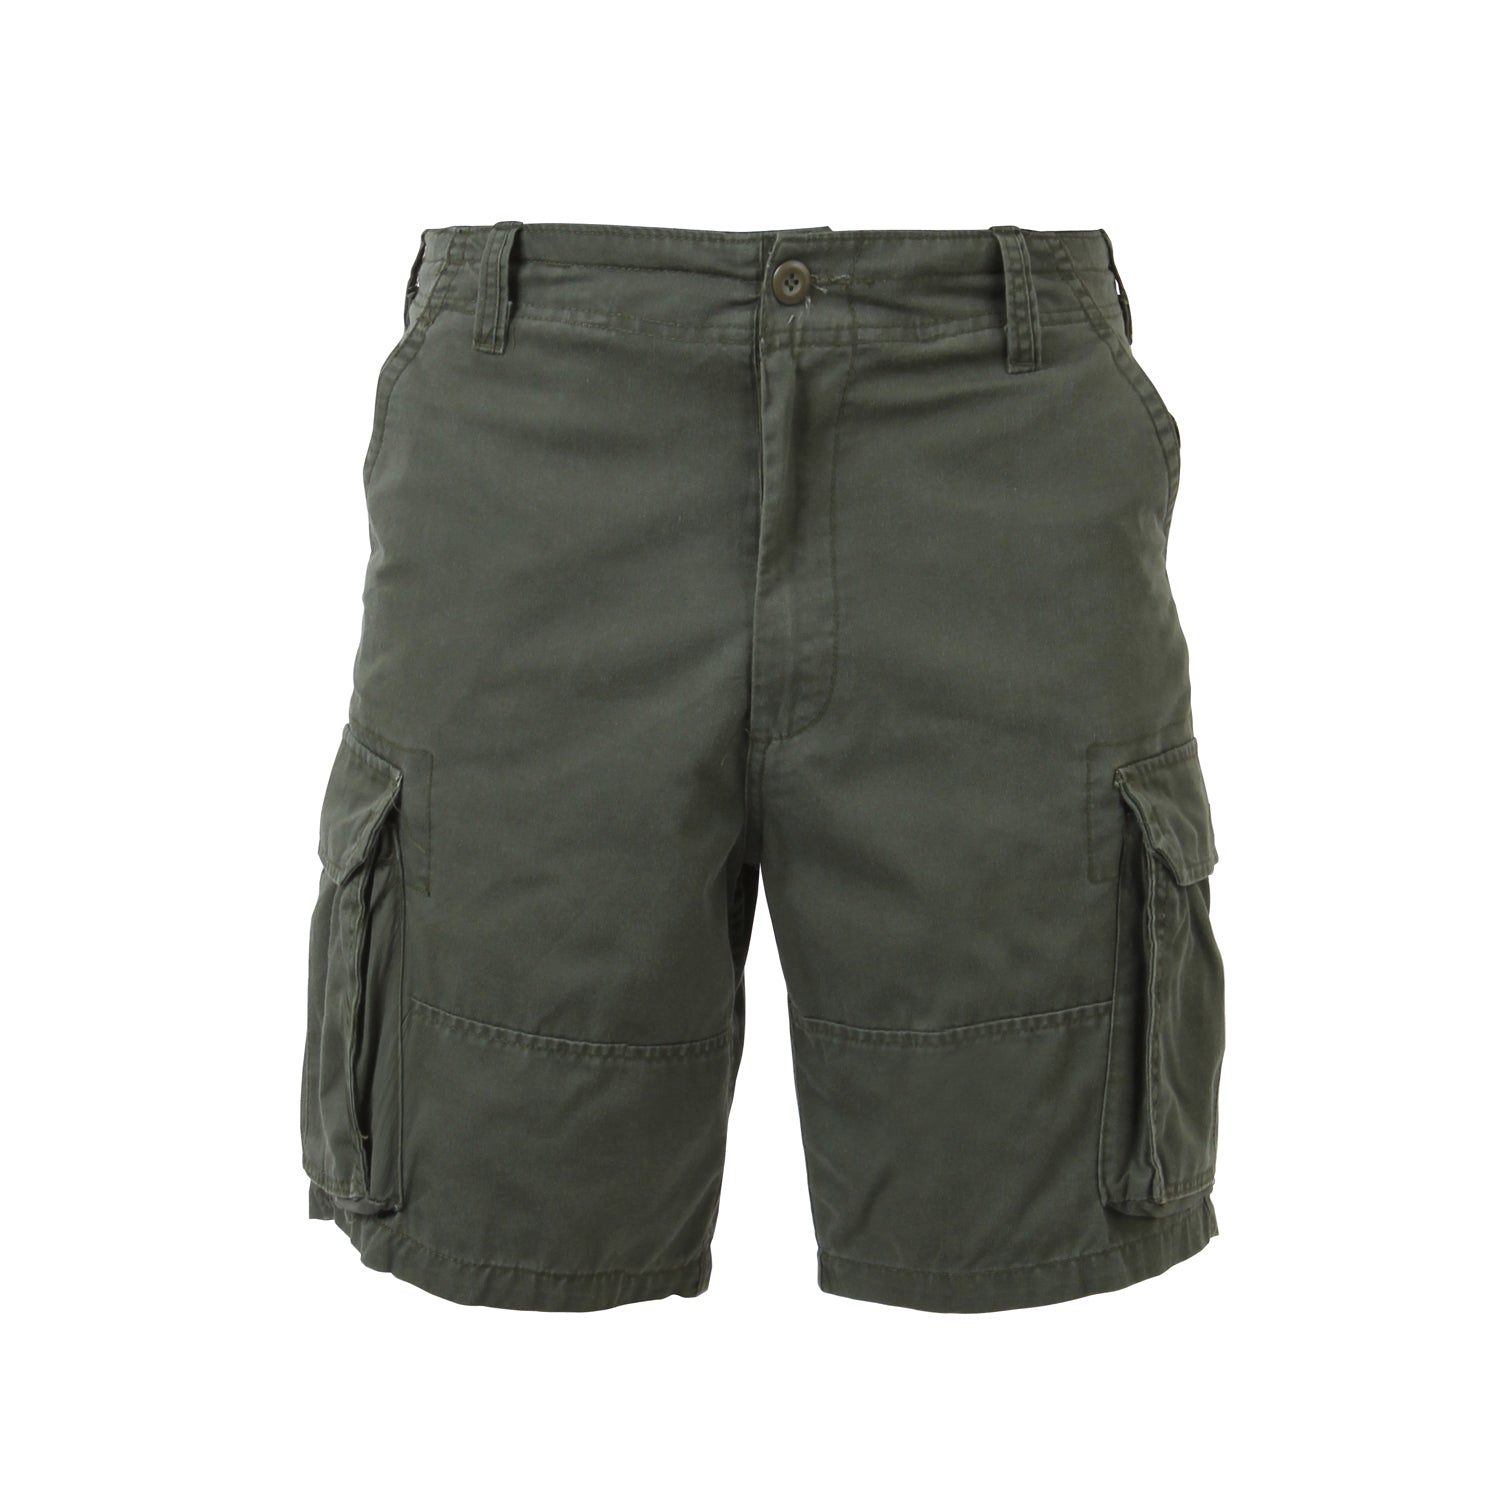 Rothco Vintage Paratrooper Cargo Shorts Olive Drab (2160)